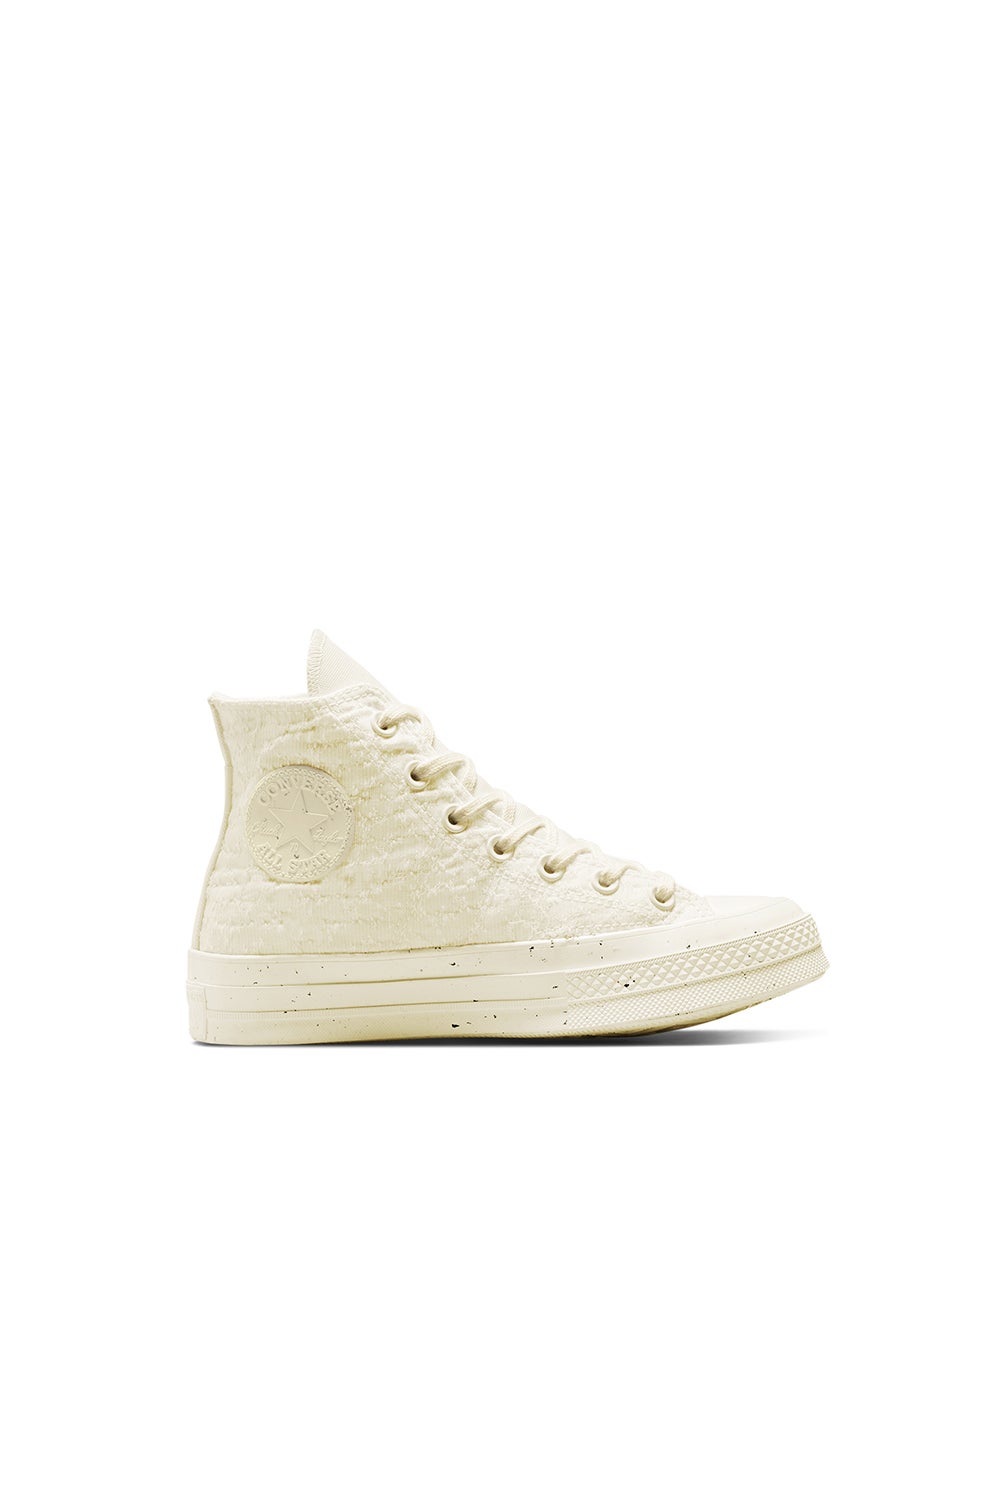 Converse Chuck 70 Mixed Recycled Hybrid Texture High Top Egret